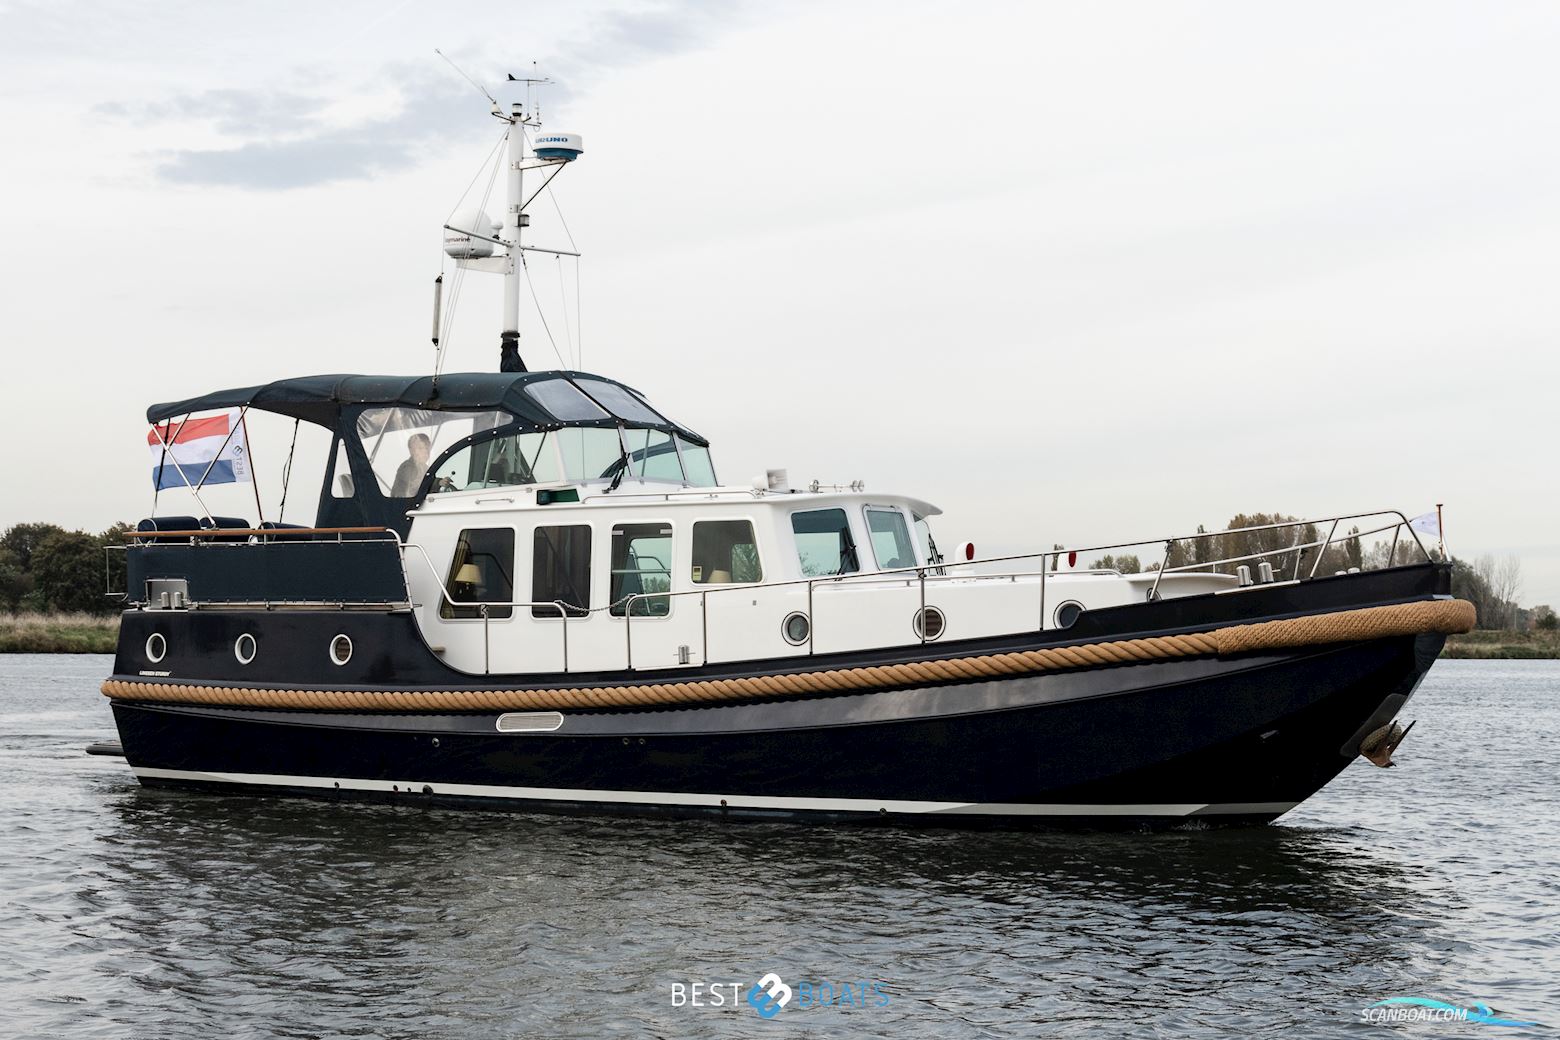 Linssen Classic Sturdy 400 Motor boat 1994, with Volvo Penta engine, The Netherlands